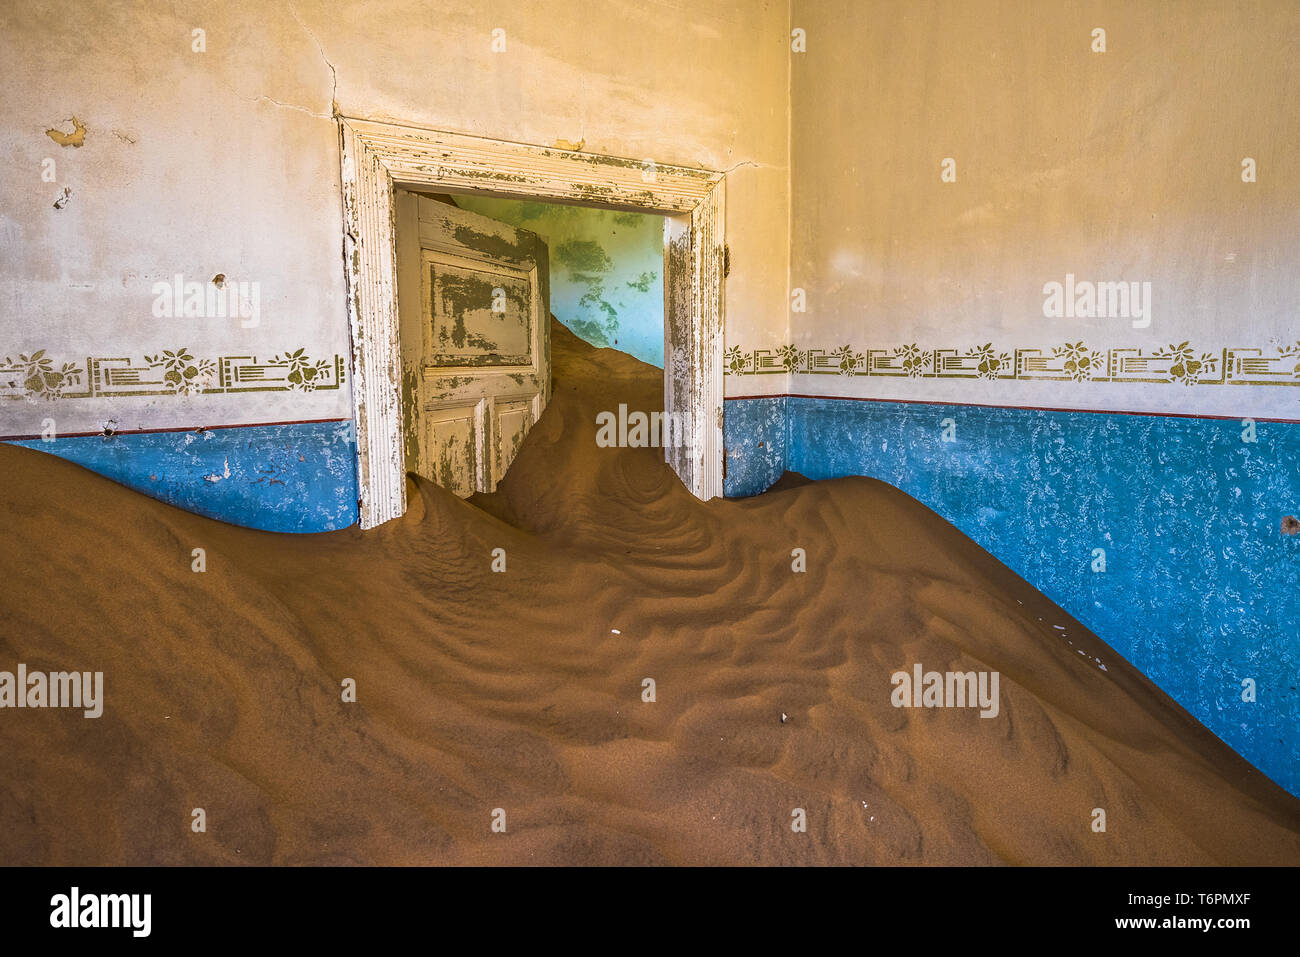 Abandoned ghost town of Kolmanskop in Namibia Stock Photo